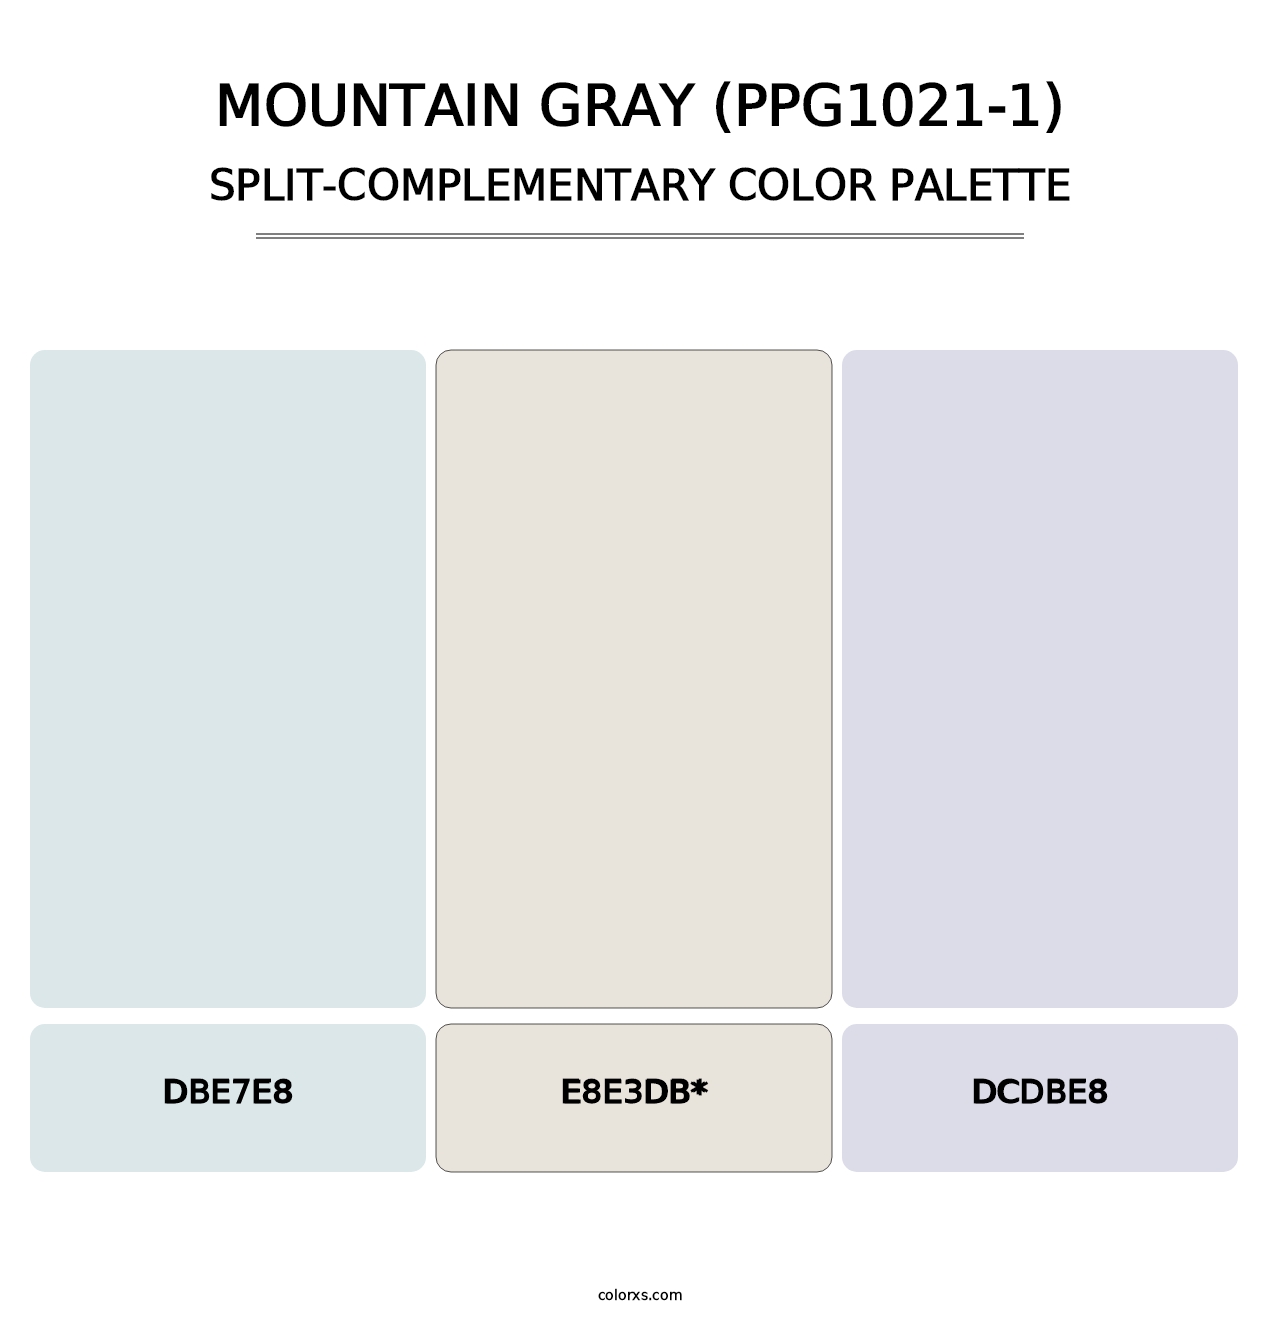 Mountain Gray (PPG1021-1) - Split-Complementary Color Palette